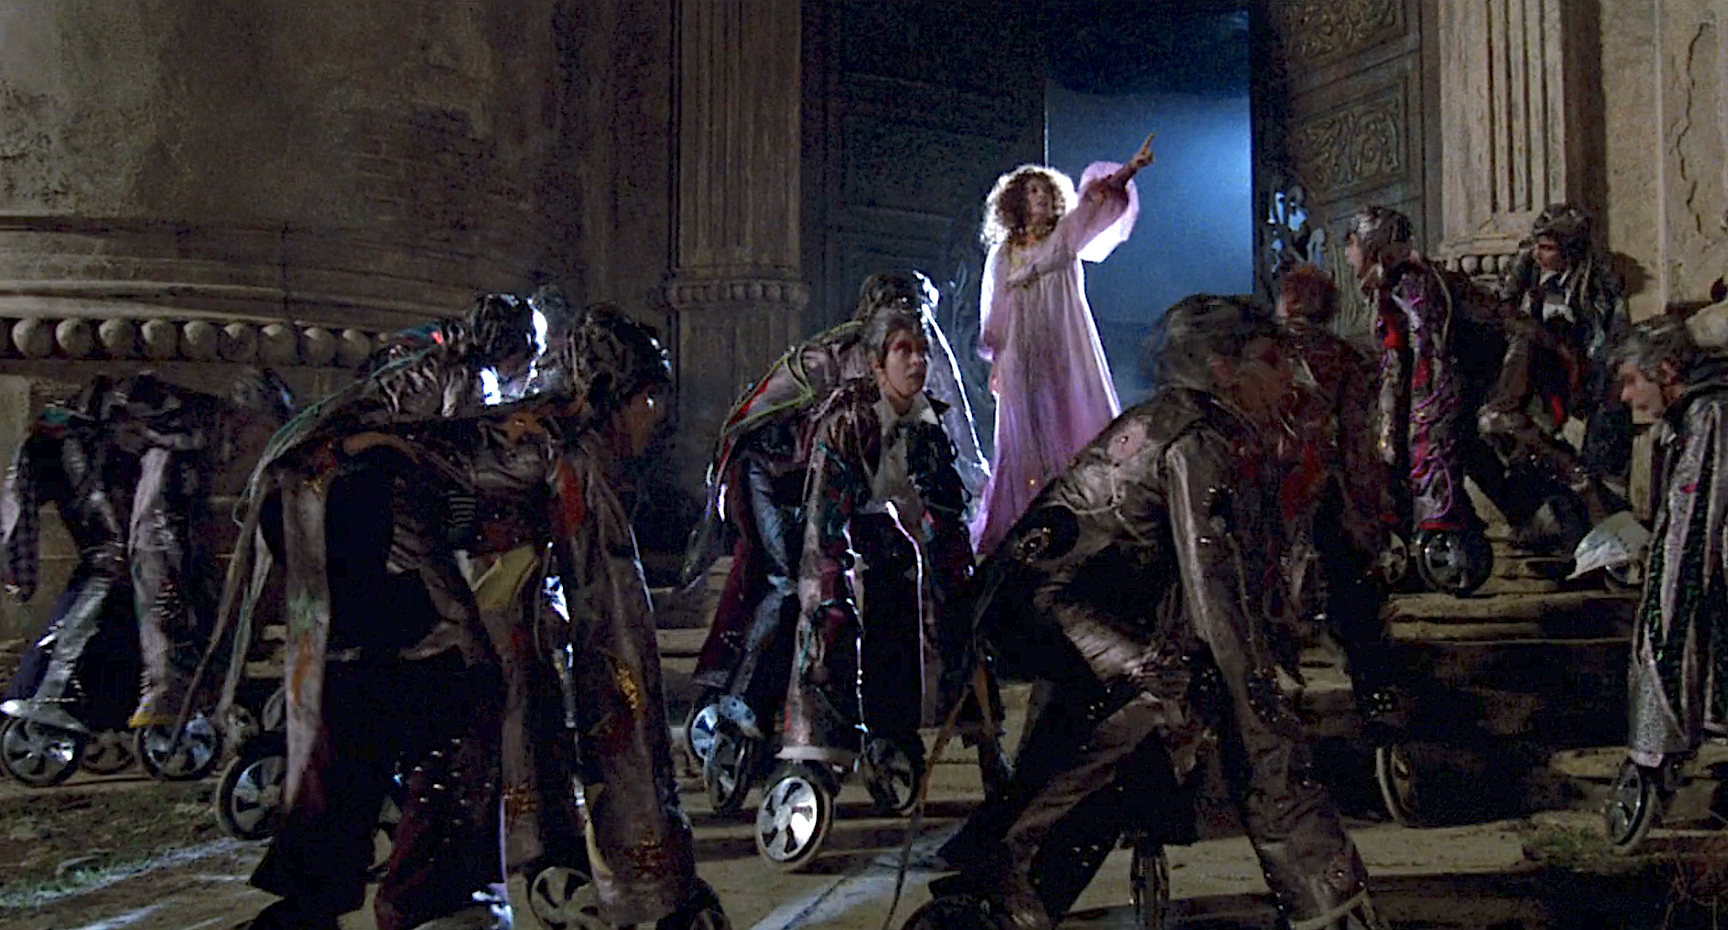 Screenshot from &quot;Return to Oz&quot;